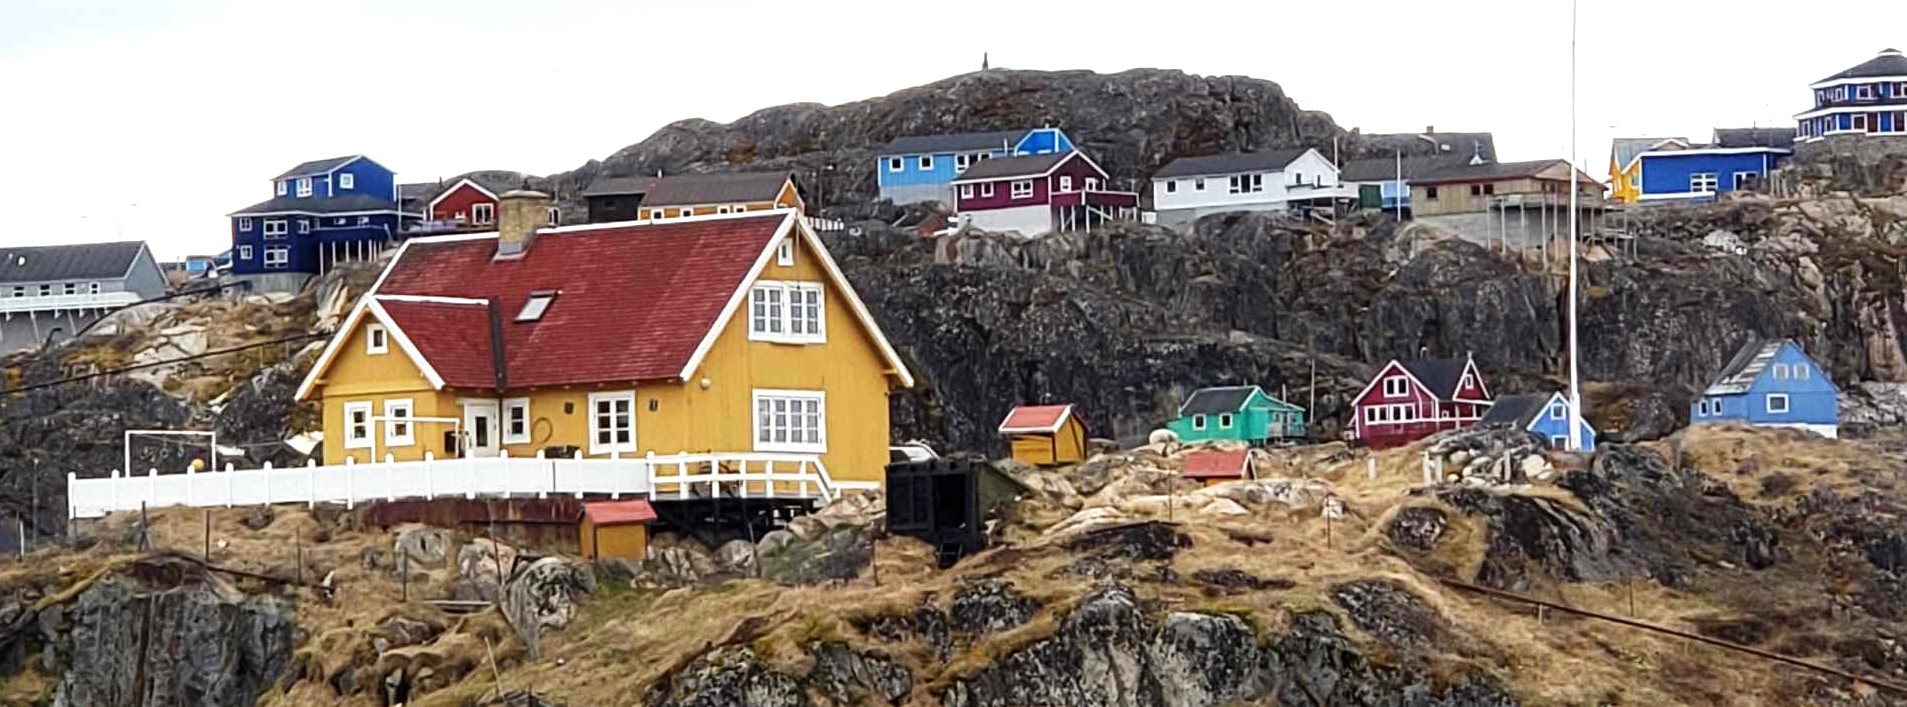 Small colorful houses dot the landscape at Sisimuit, Greenland. Photo by Susan J. Young. 